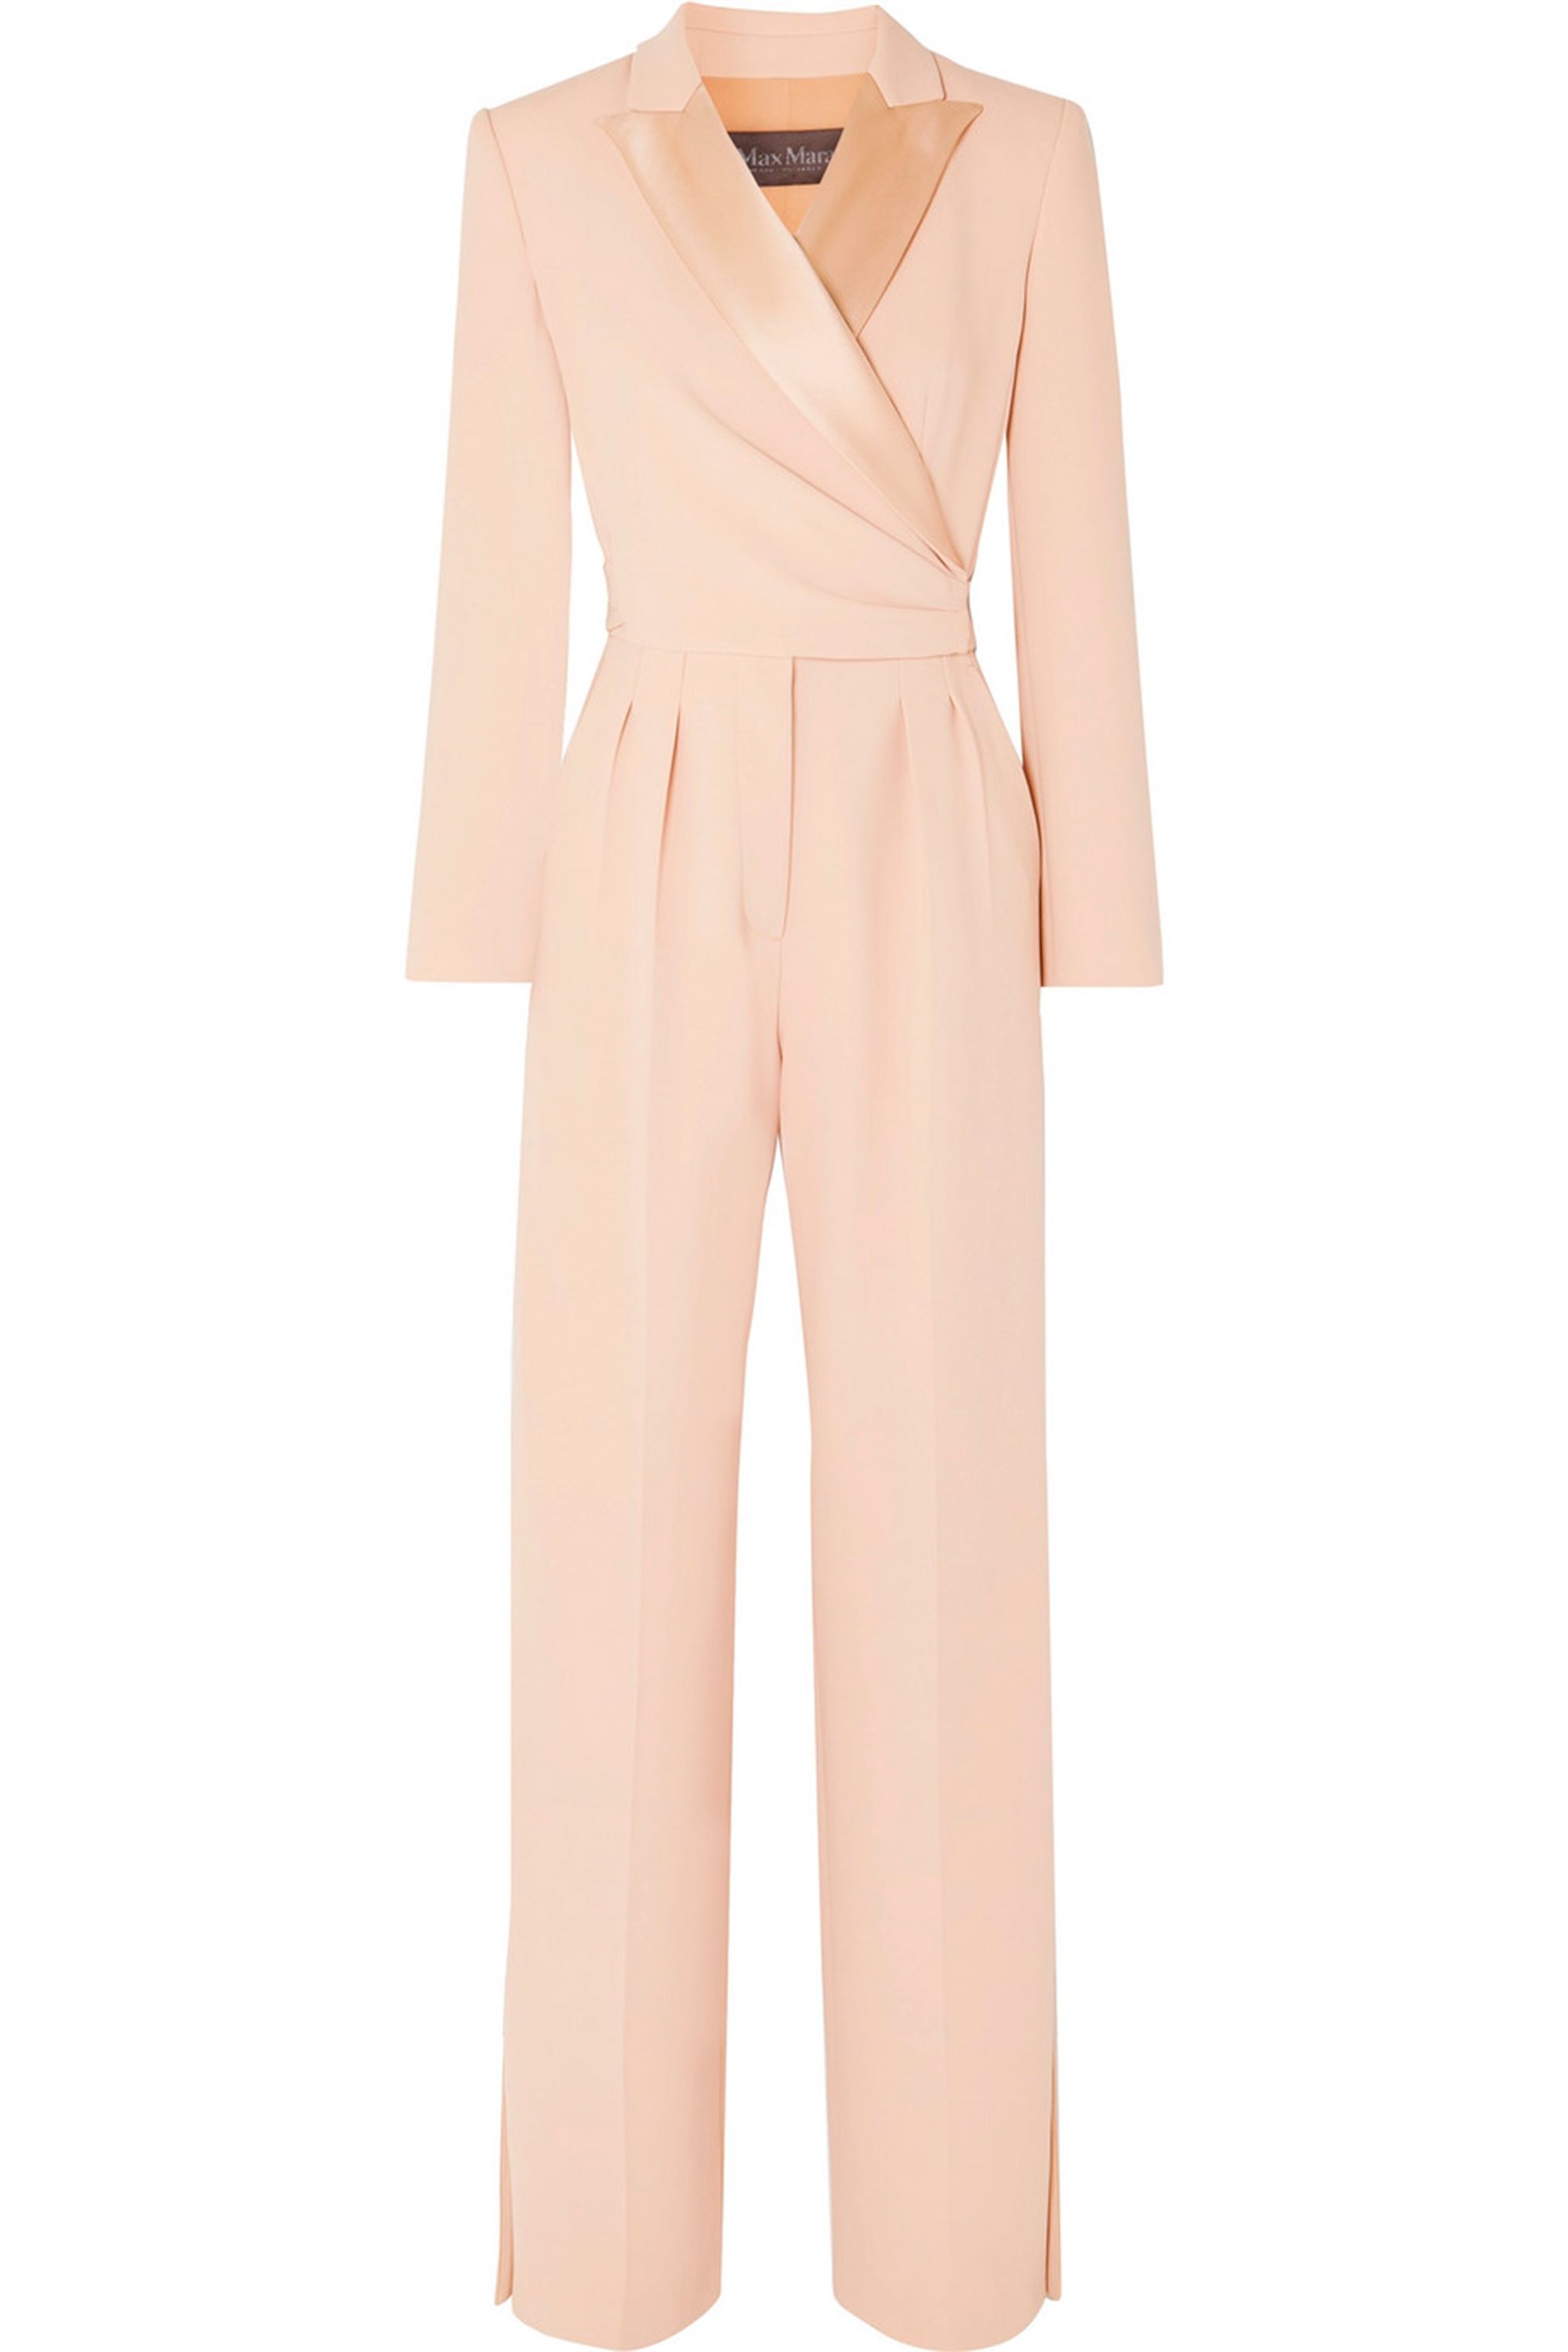 NWT ZARA CAPE V-NECK JUMPSUIT LACE-NUDE PINK CAPE-LIKE SLEEVES WIDE-LEG TROUSERS 